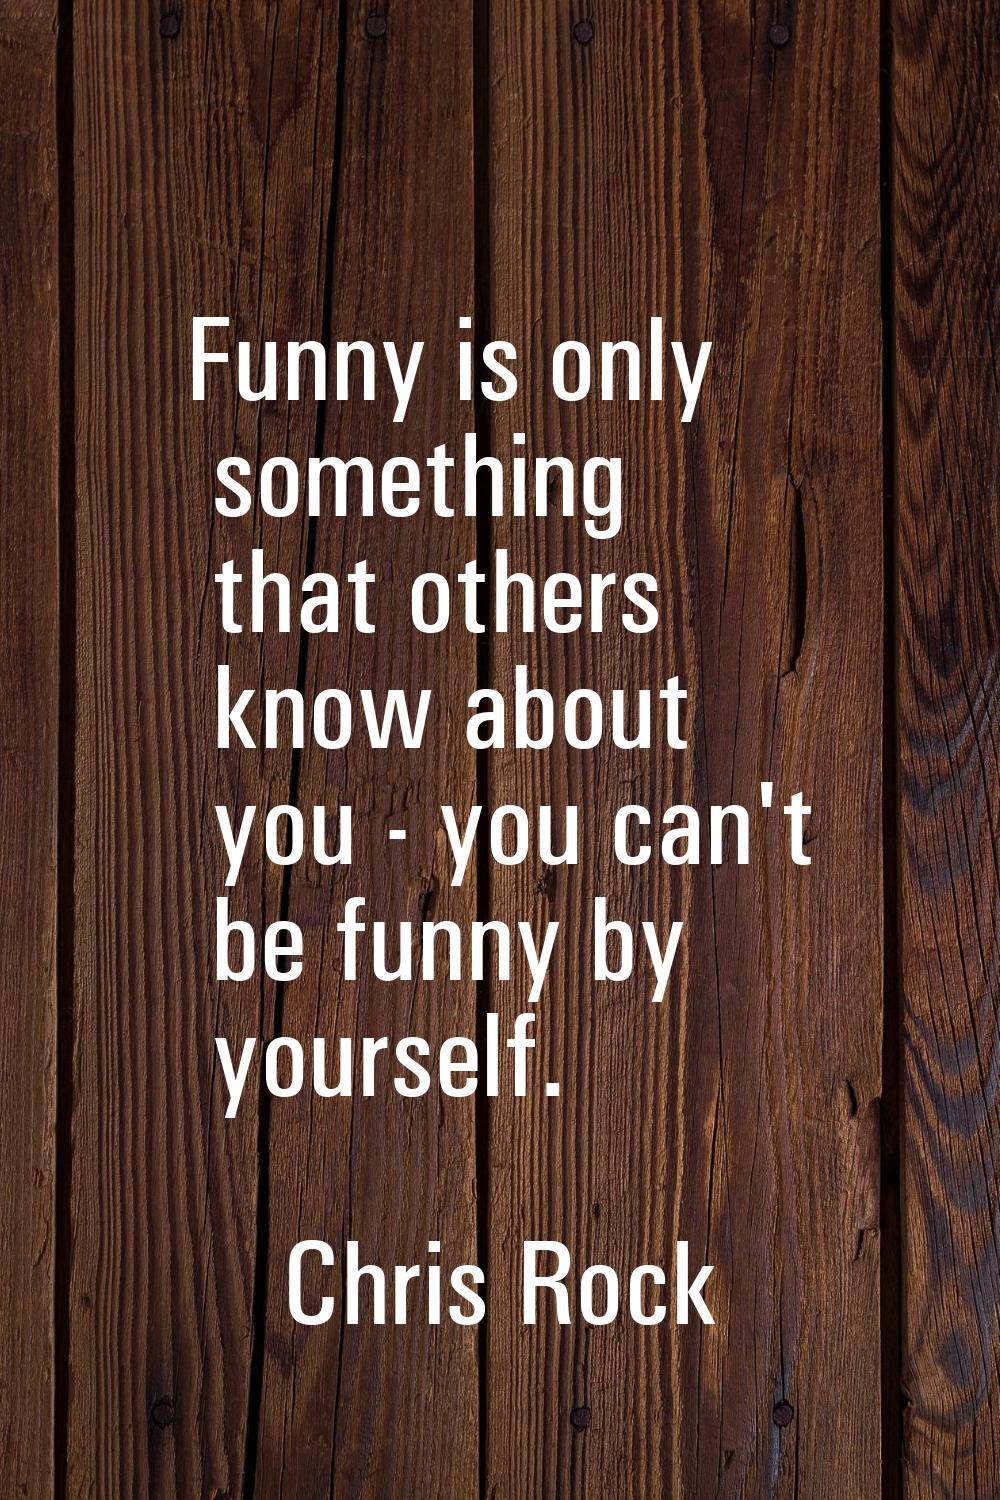 Funny is only something that others know about you - you can't be funny by yourself.